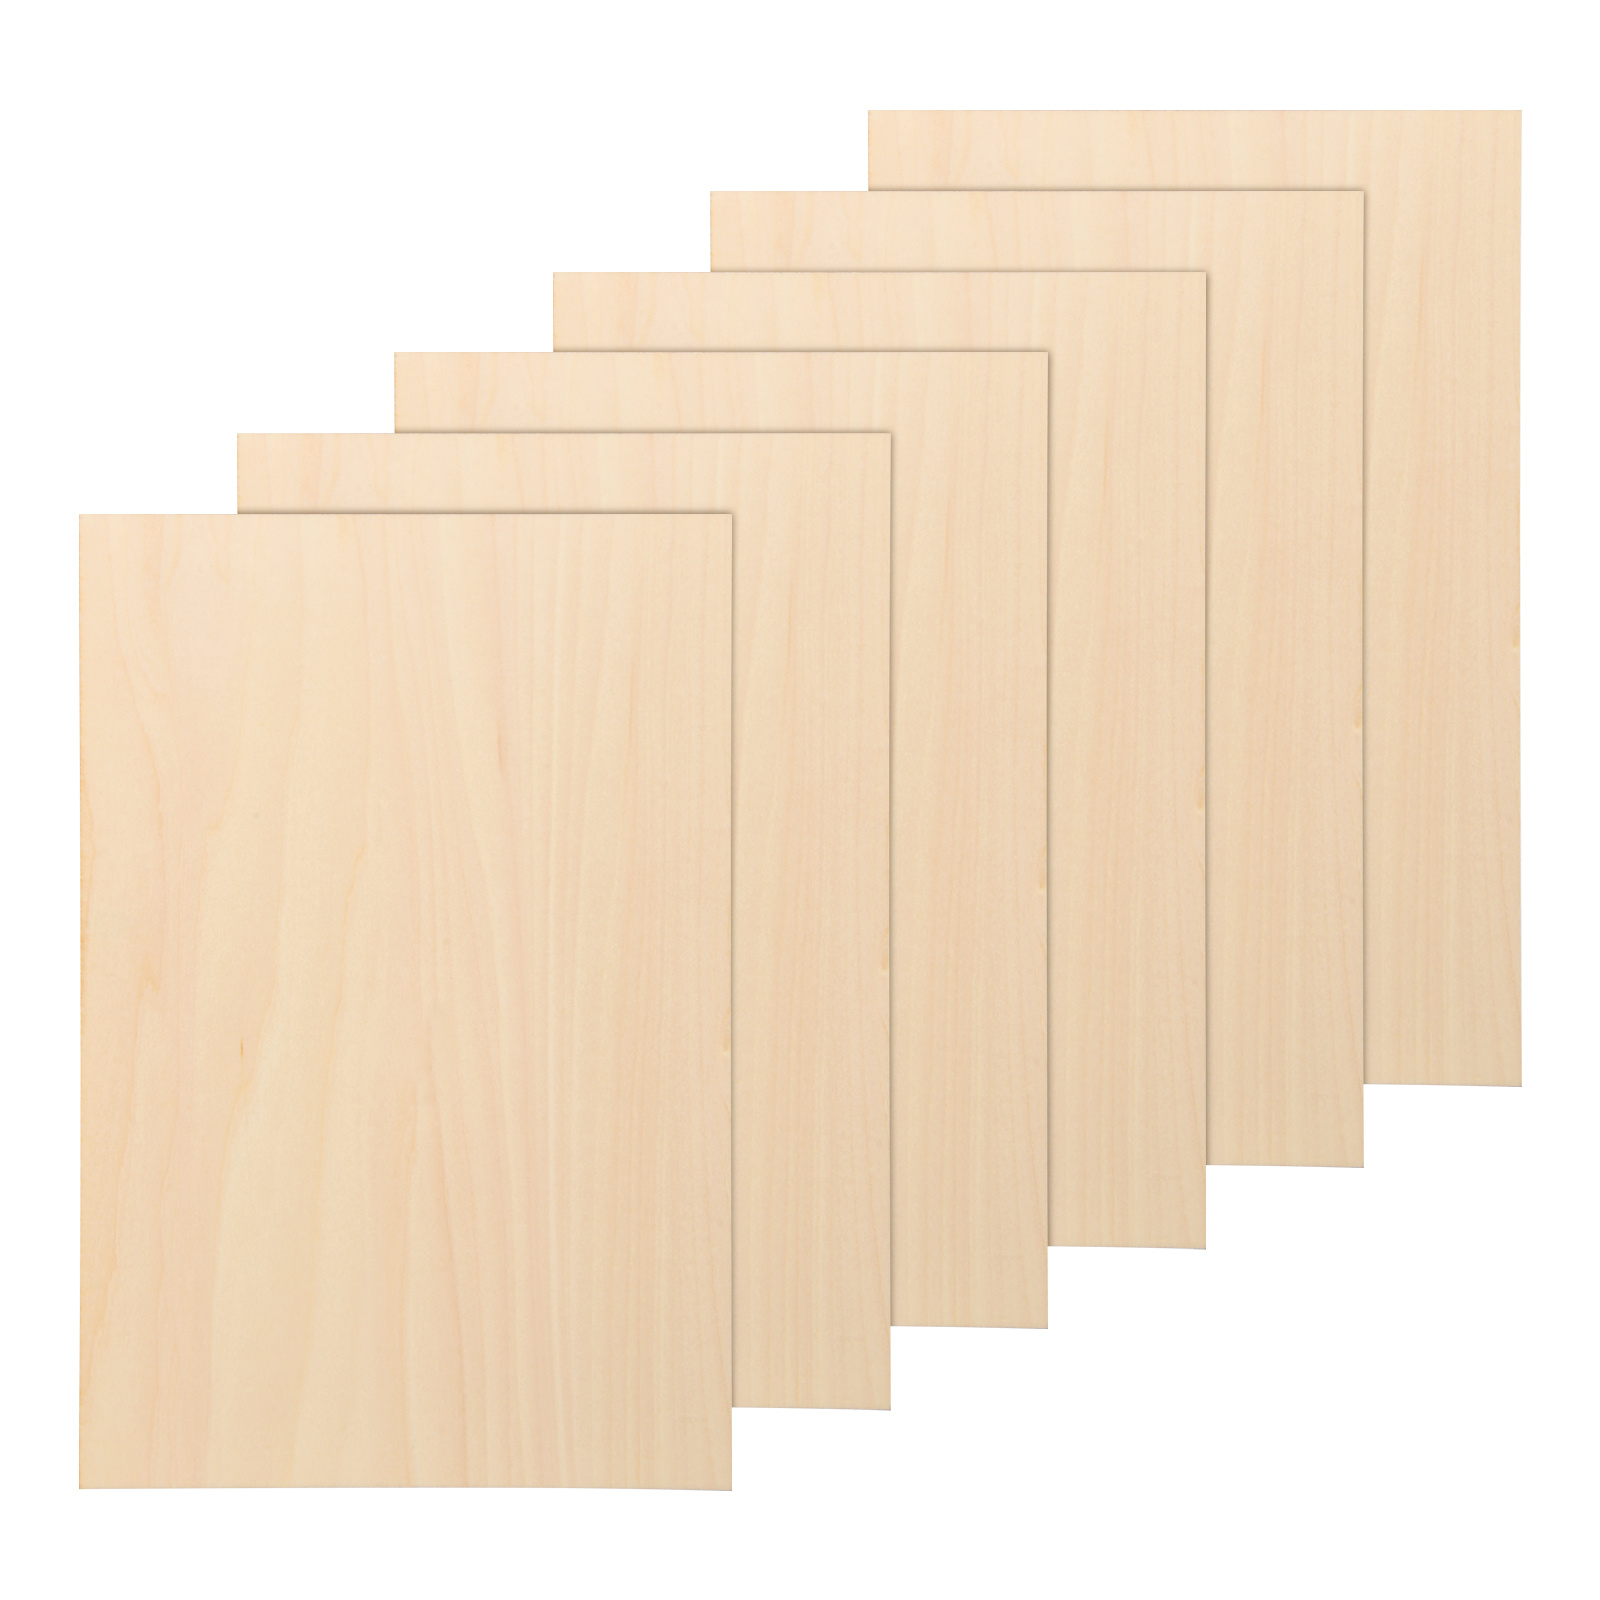 8PCS Unfinished Wood, 6 X 6inch/15*15cm - 2mm Thick Wood Unfinished Planks,  Blank Wood Cutouts For Crafts, Arts And Crafts, Wood Carving For Wooden  Cutout School Projects Crafts DIY Model Carving